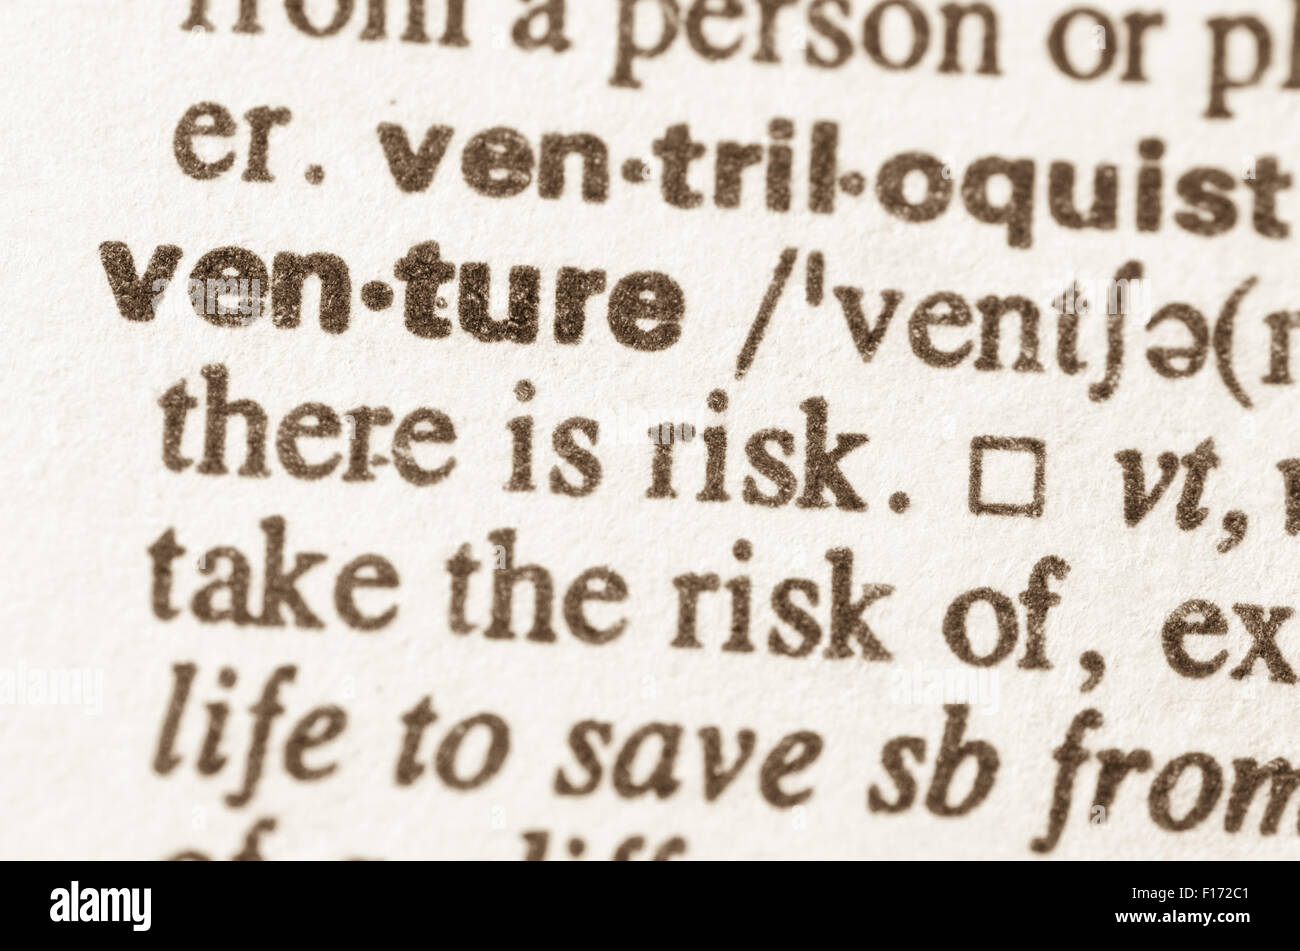 Definition of word venture in dictionary Stock Photo